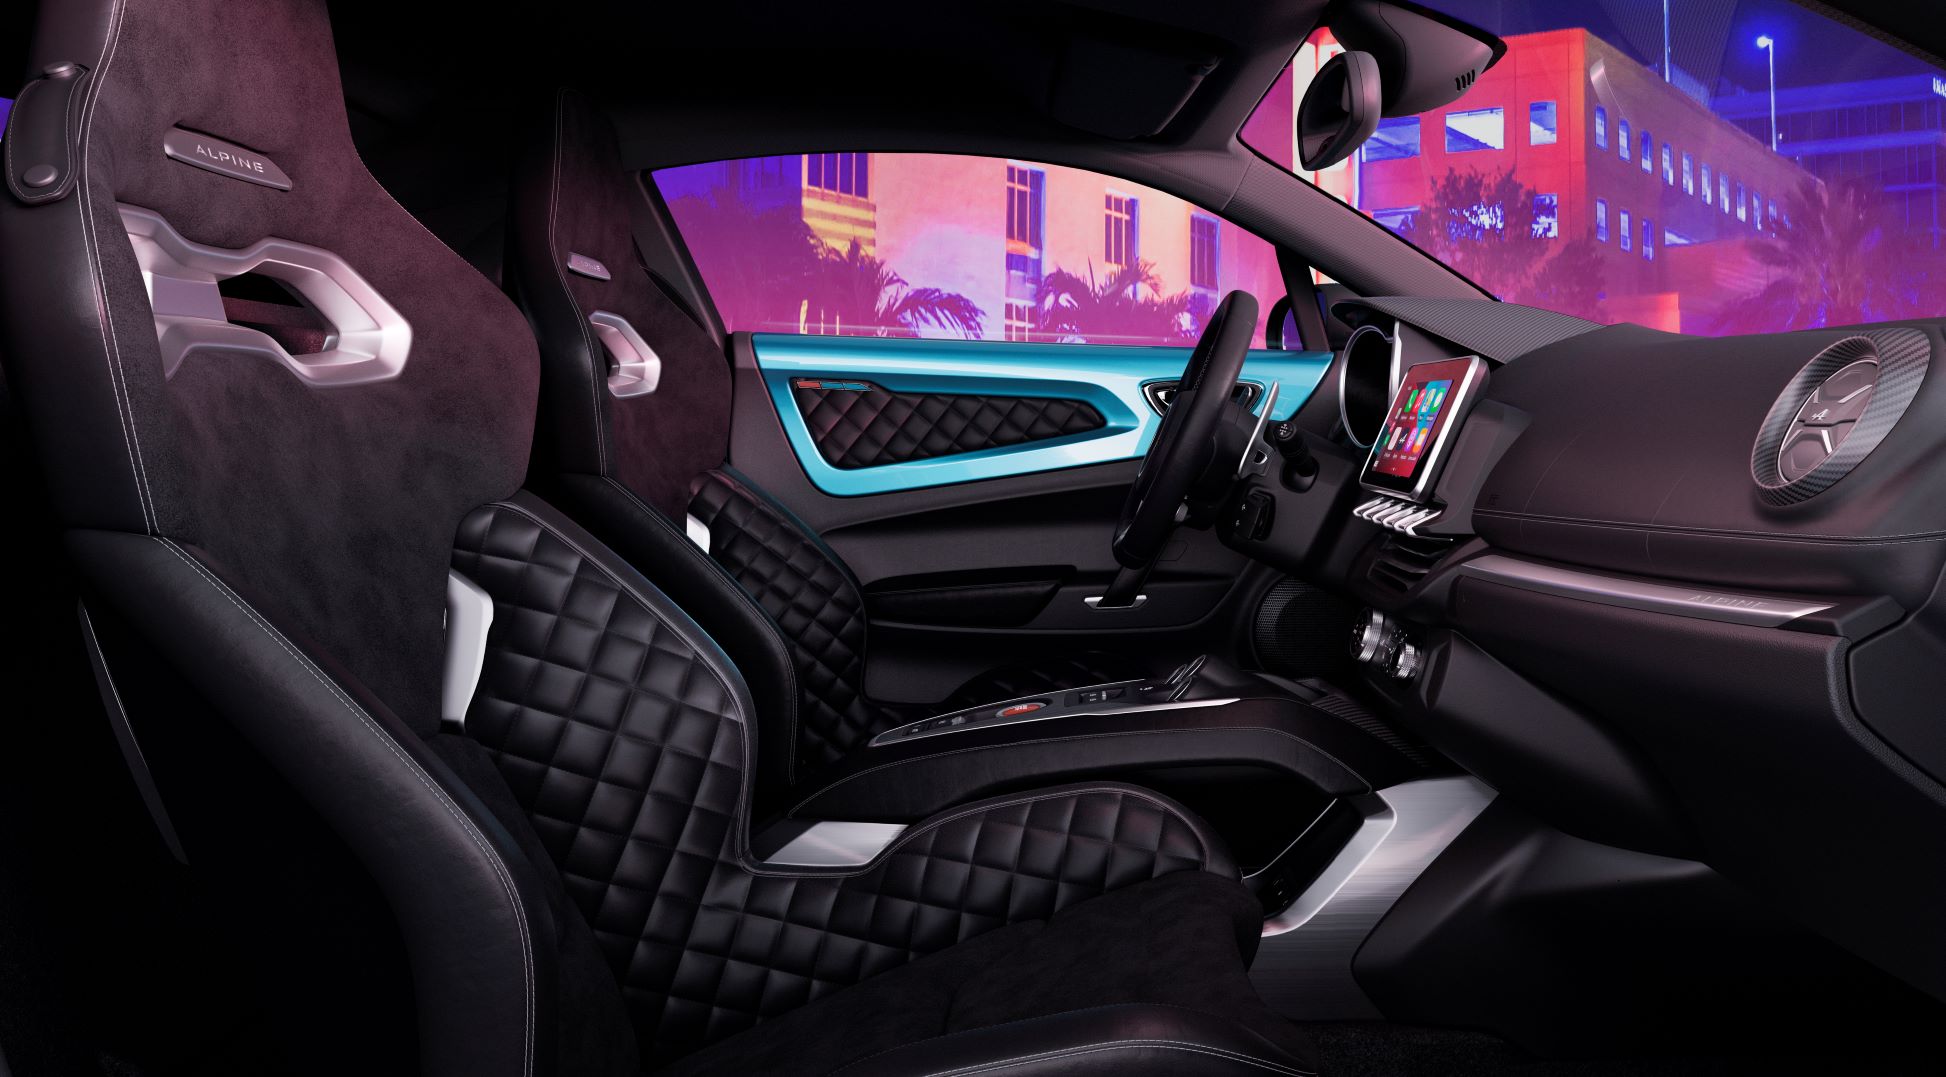 Interior view of the Alpine A110 with the South Beach colorway